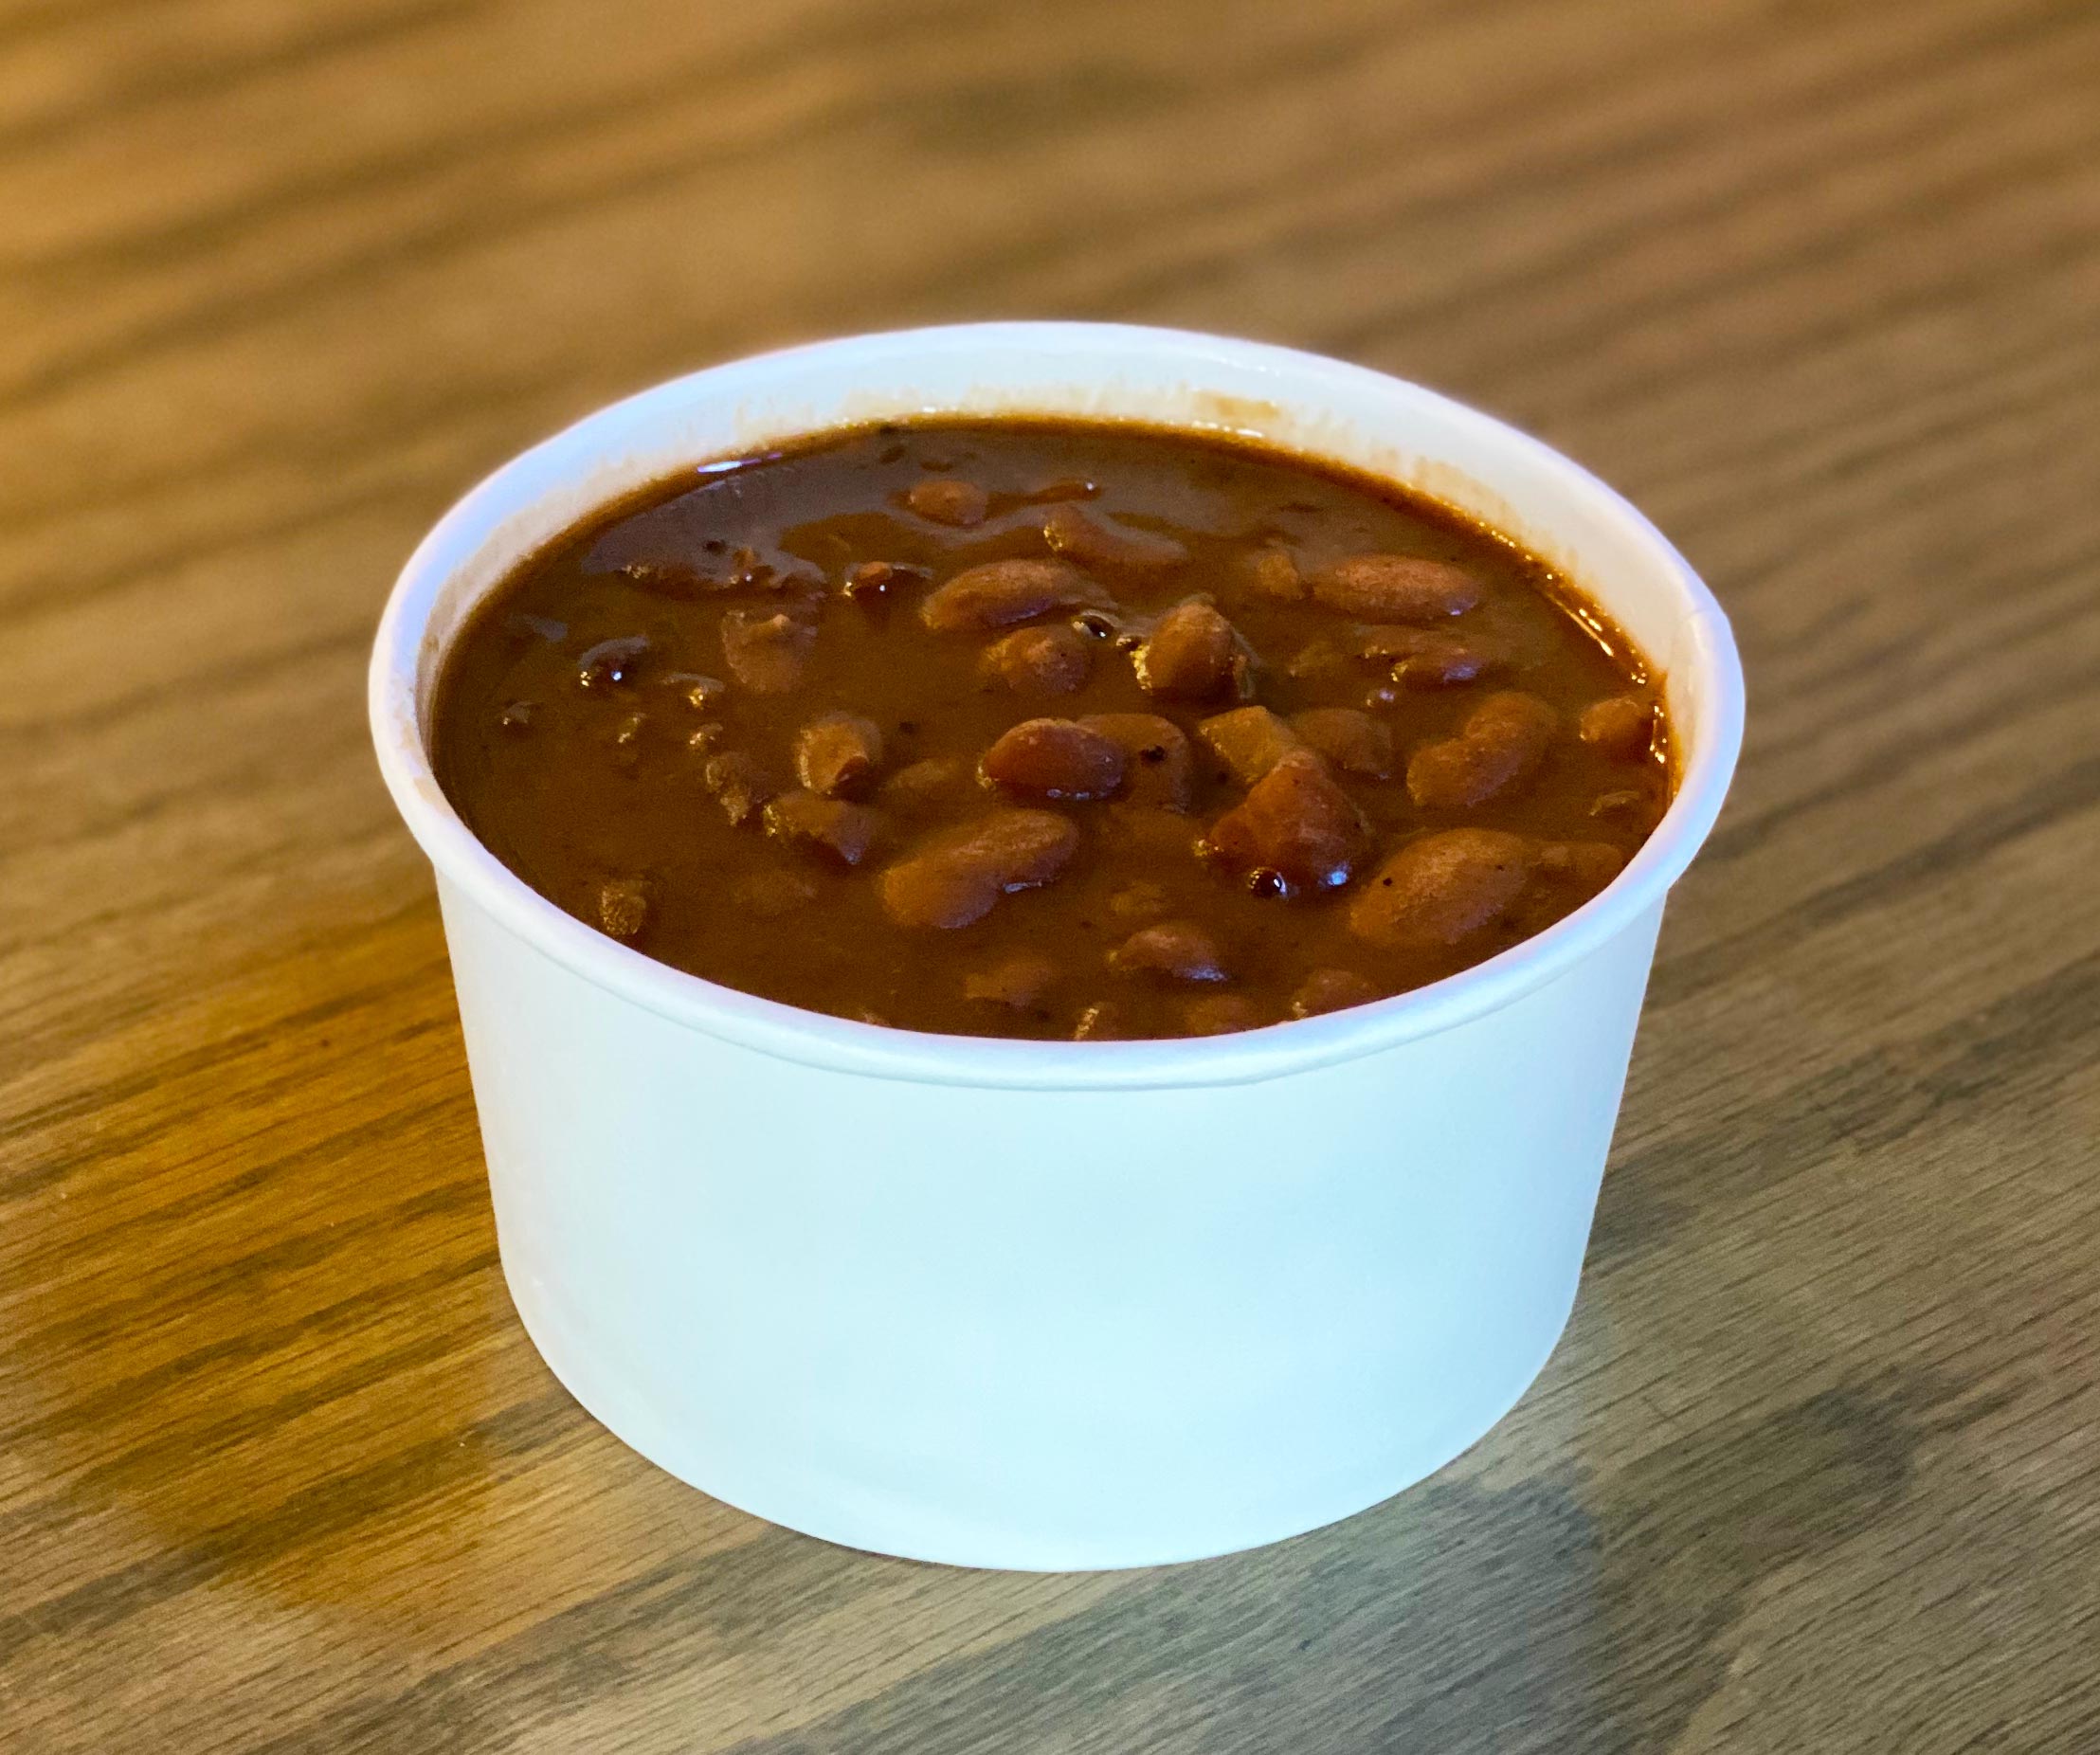 A side order of pinto beans at Old 300 BBQ